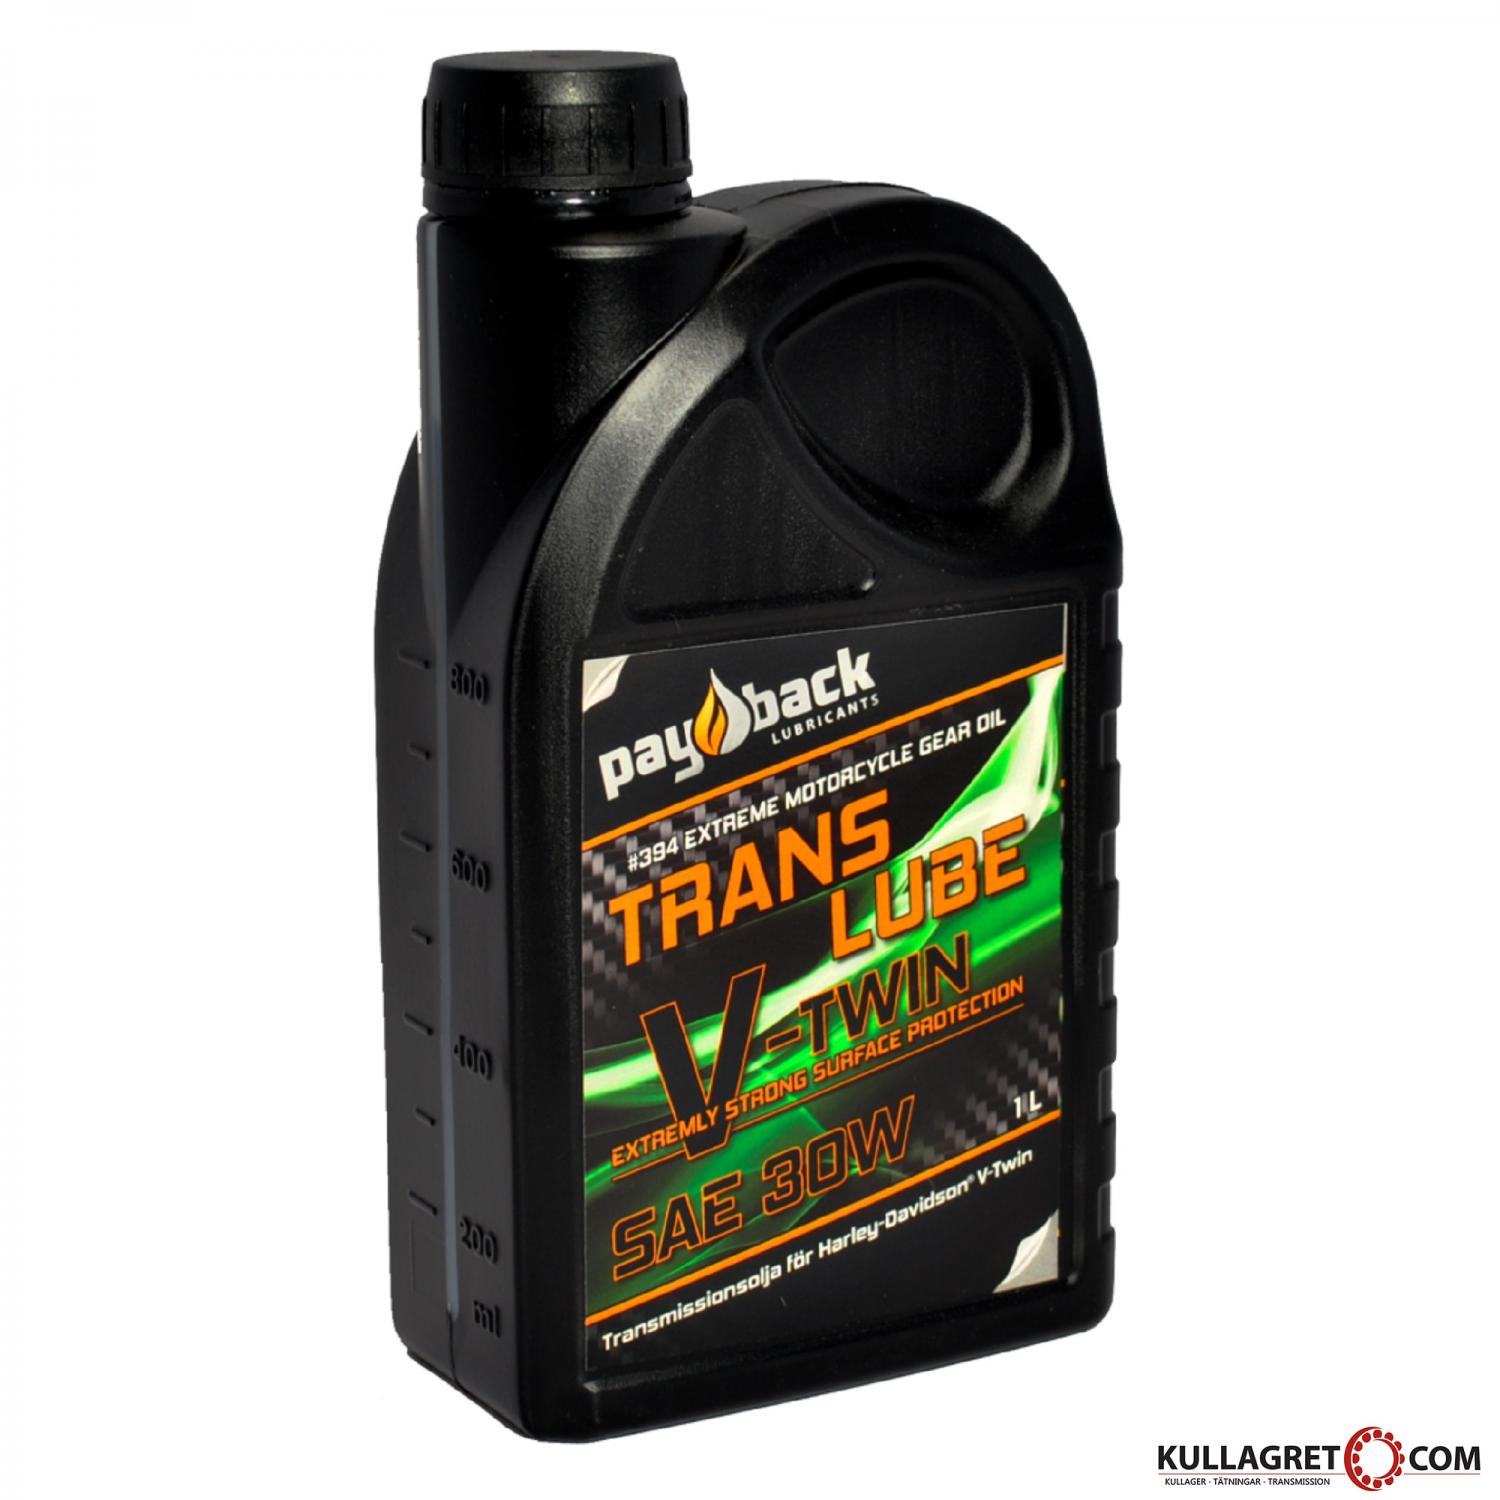 Payback #394 SAE 30W Trans Lube V-Twin